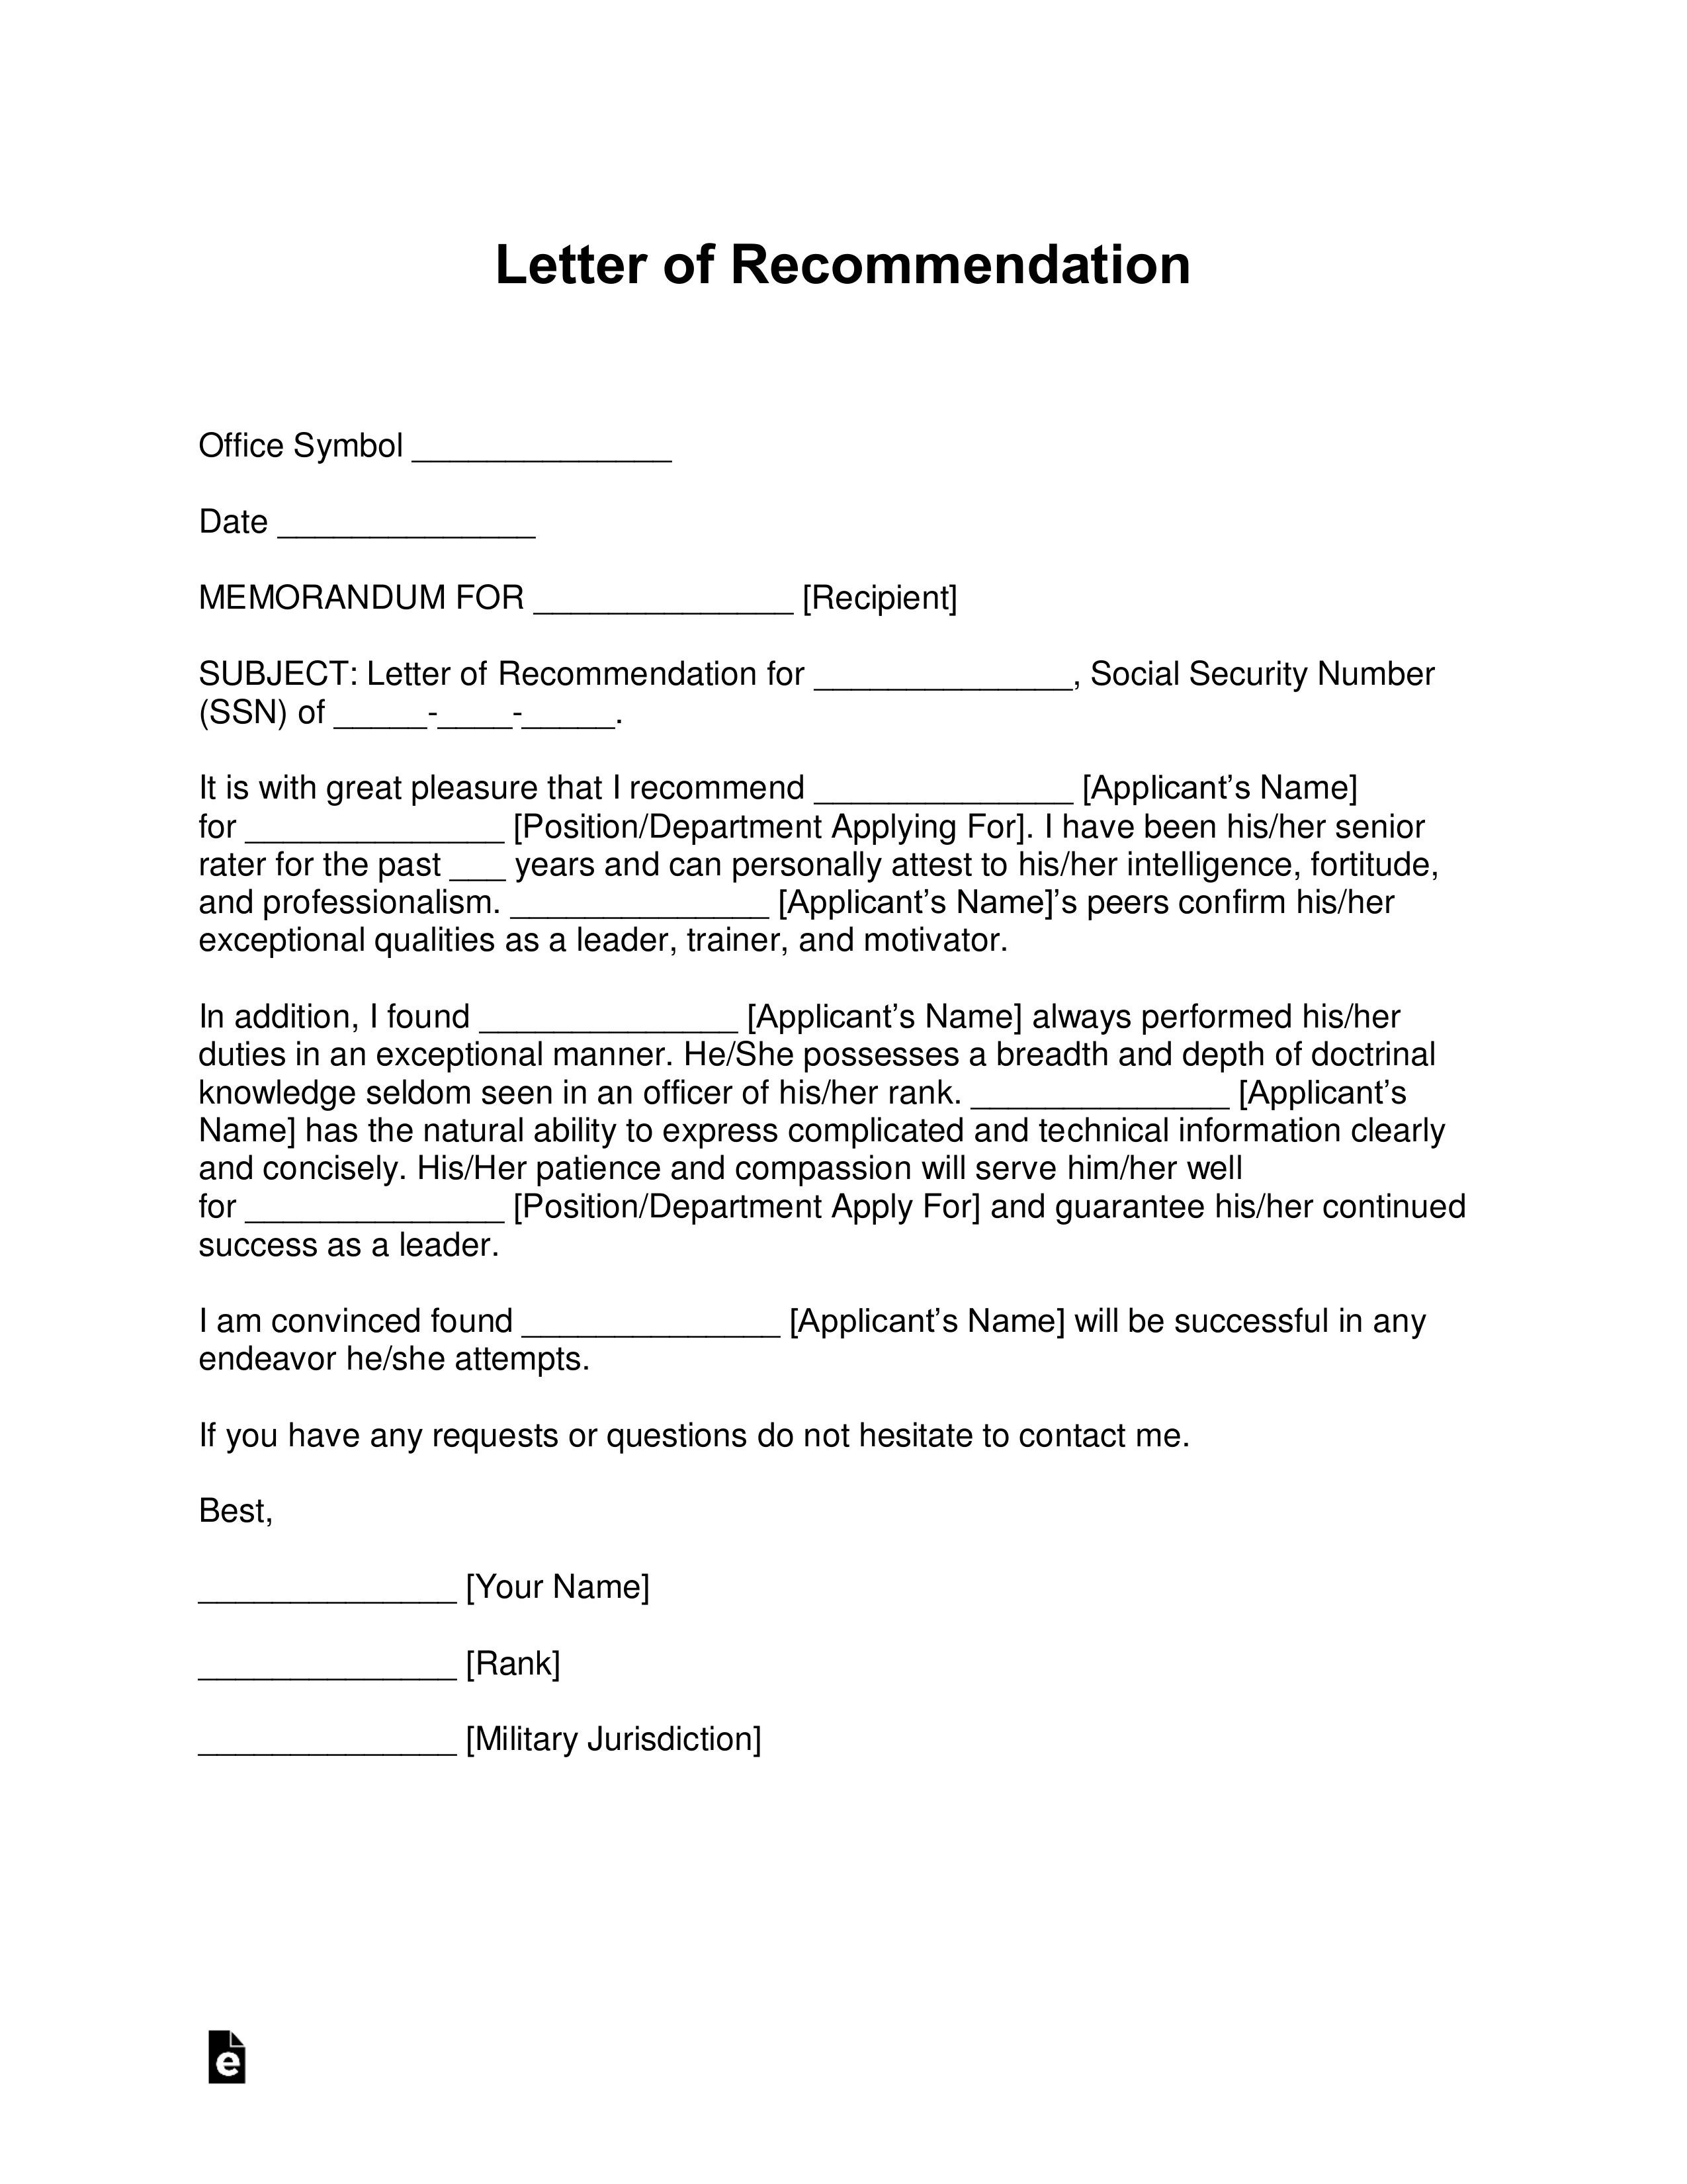 Sample Letter Of Recommendation For Student Athlete